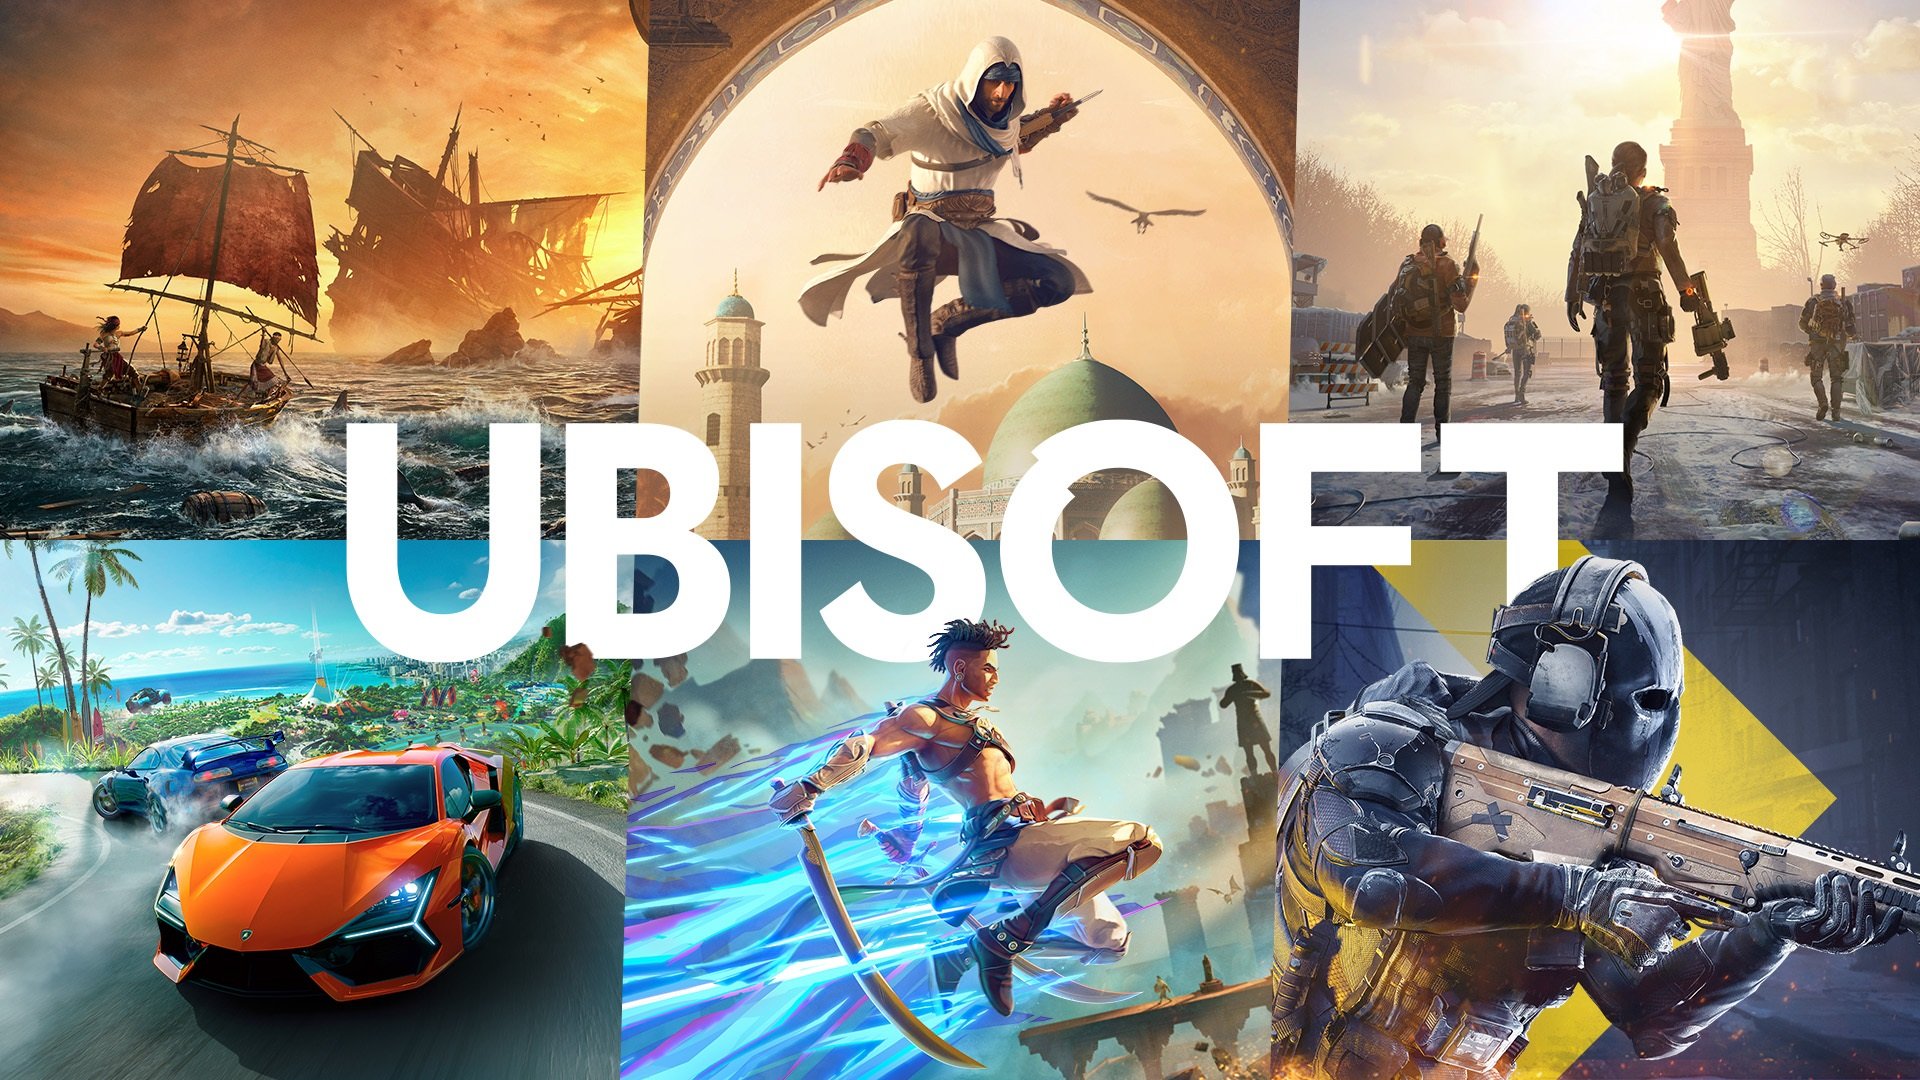 Activision Blizzard games are heading to Ubisoft+